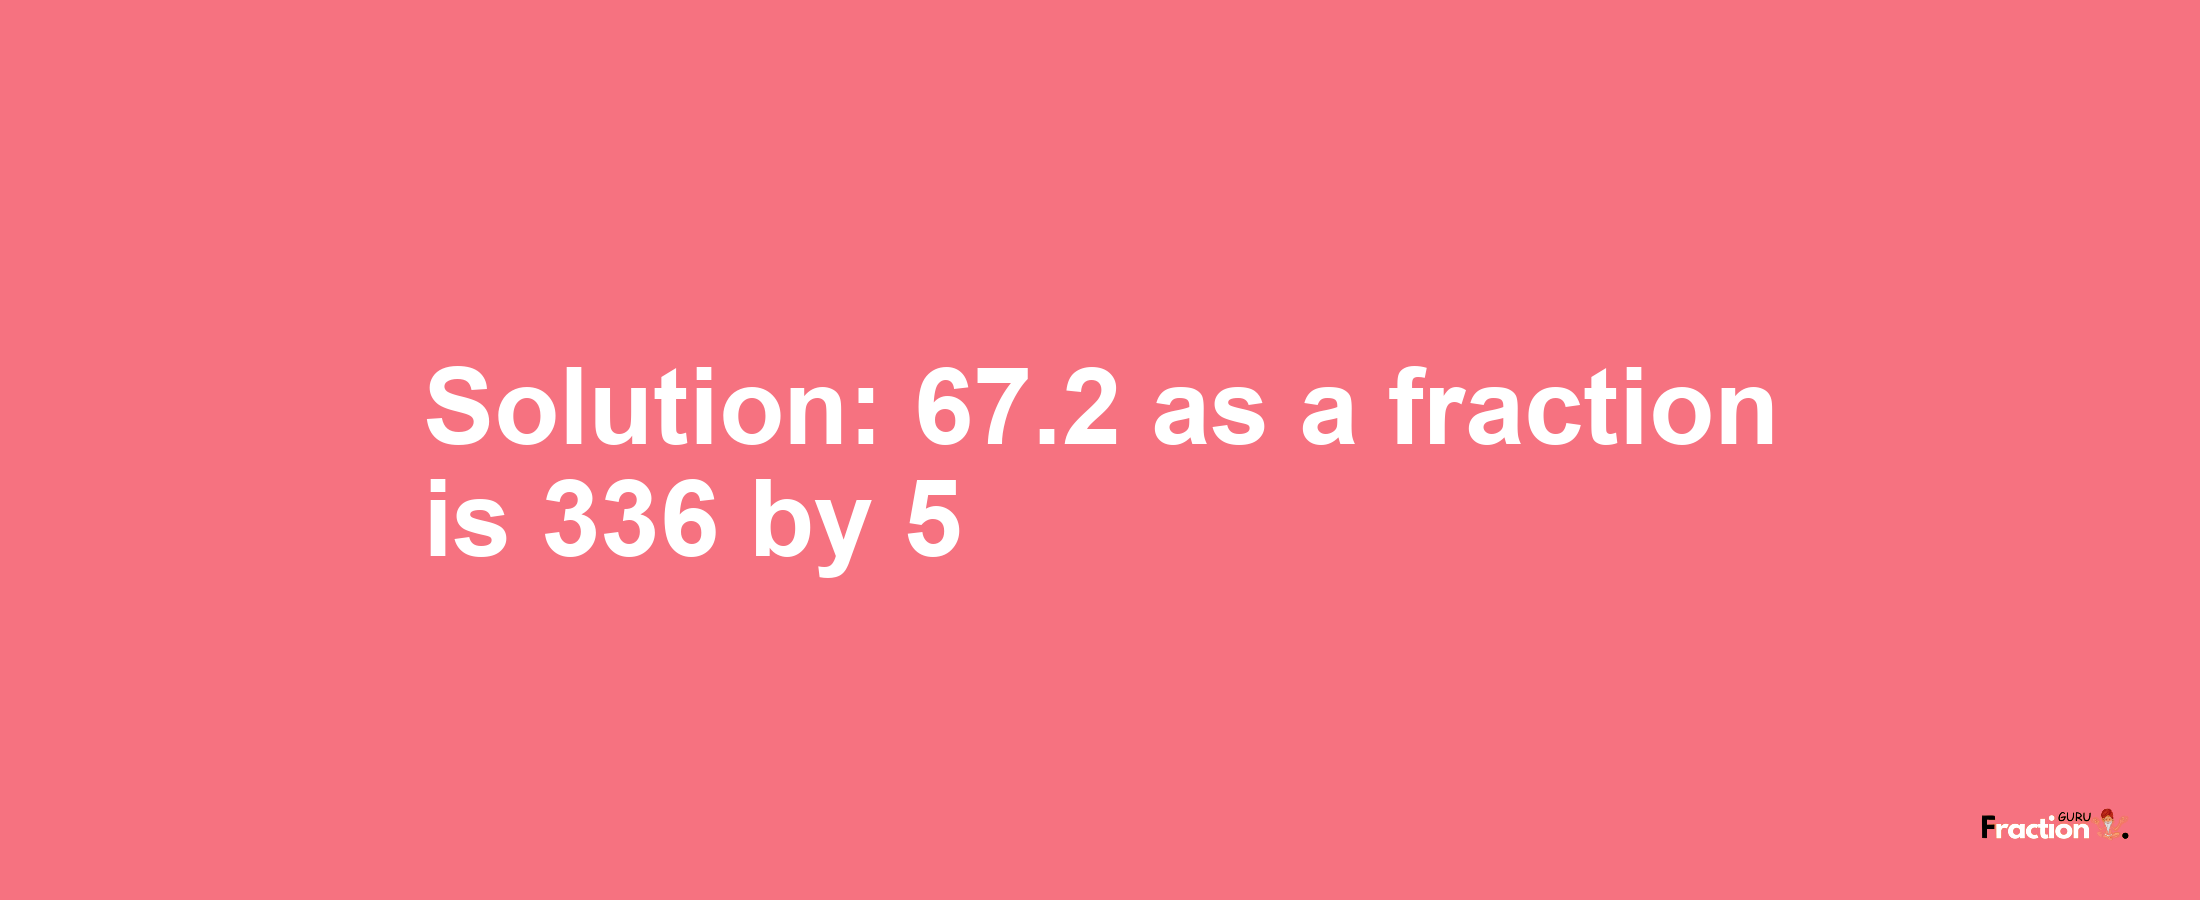 Solution:67.2 as a fraction is 336/5